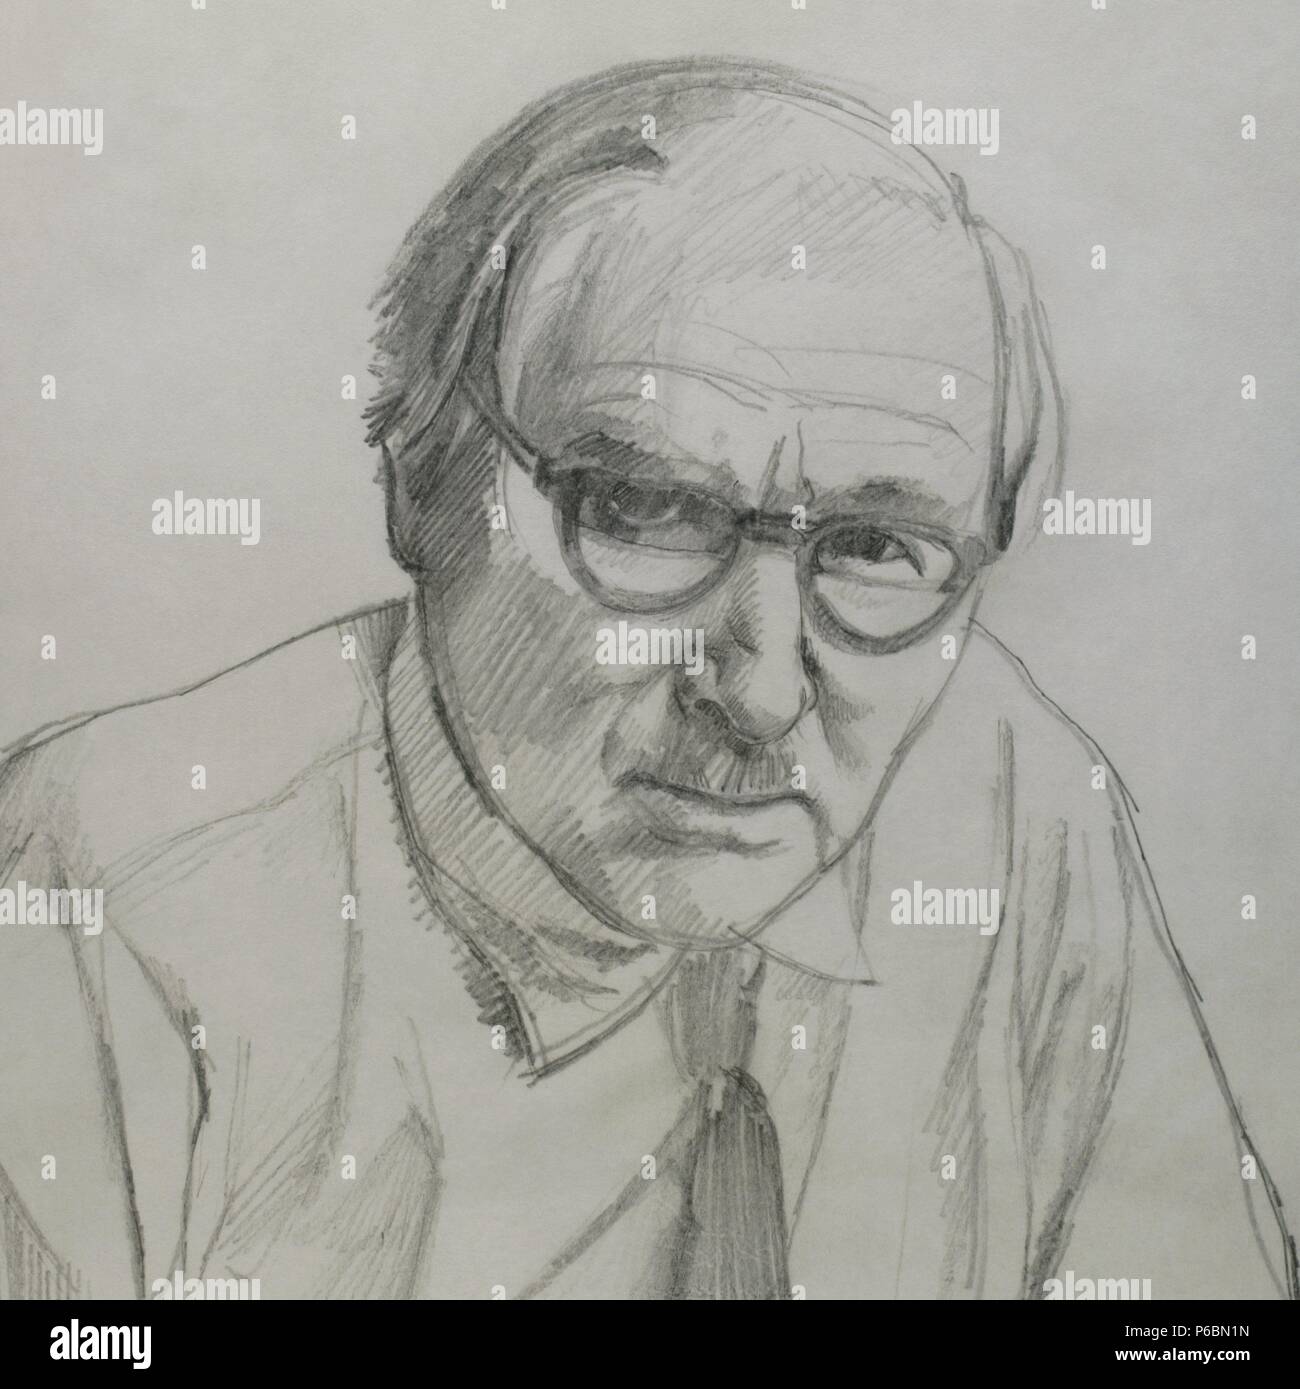 Louis Leakey (1903-1972). British paleoanthropoligist and archaeologist whose eas important in establishing human evolutionary. Africa, Olduvai Gorge. Drawing. Stock Photo